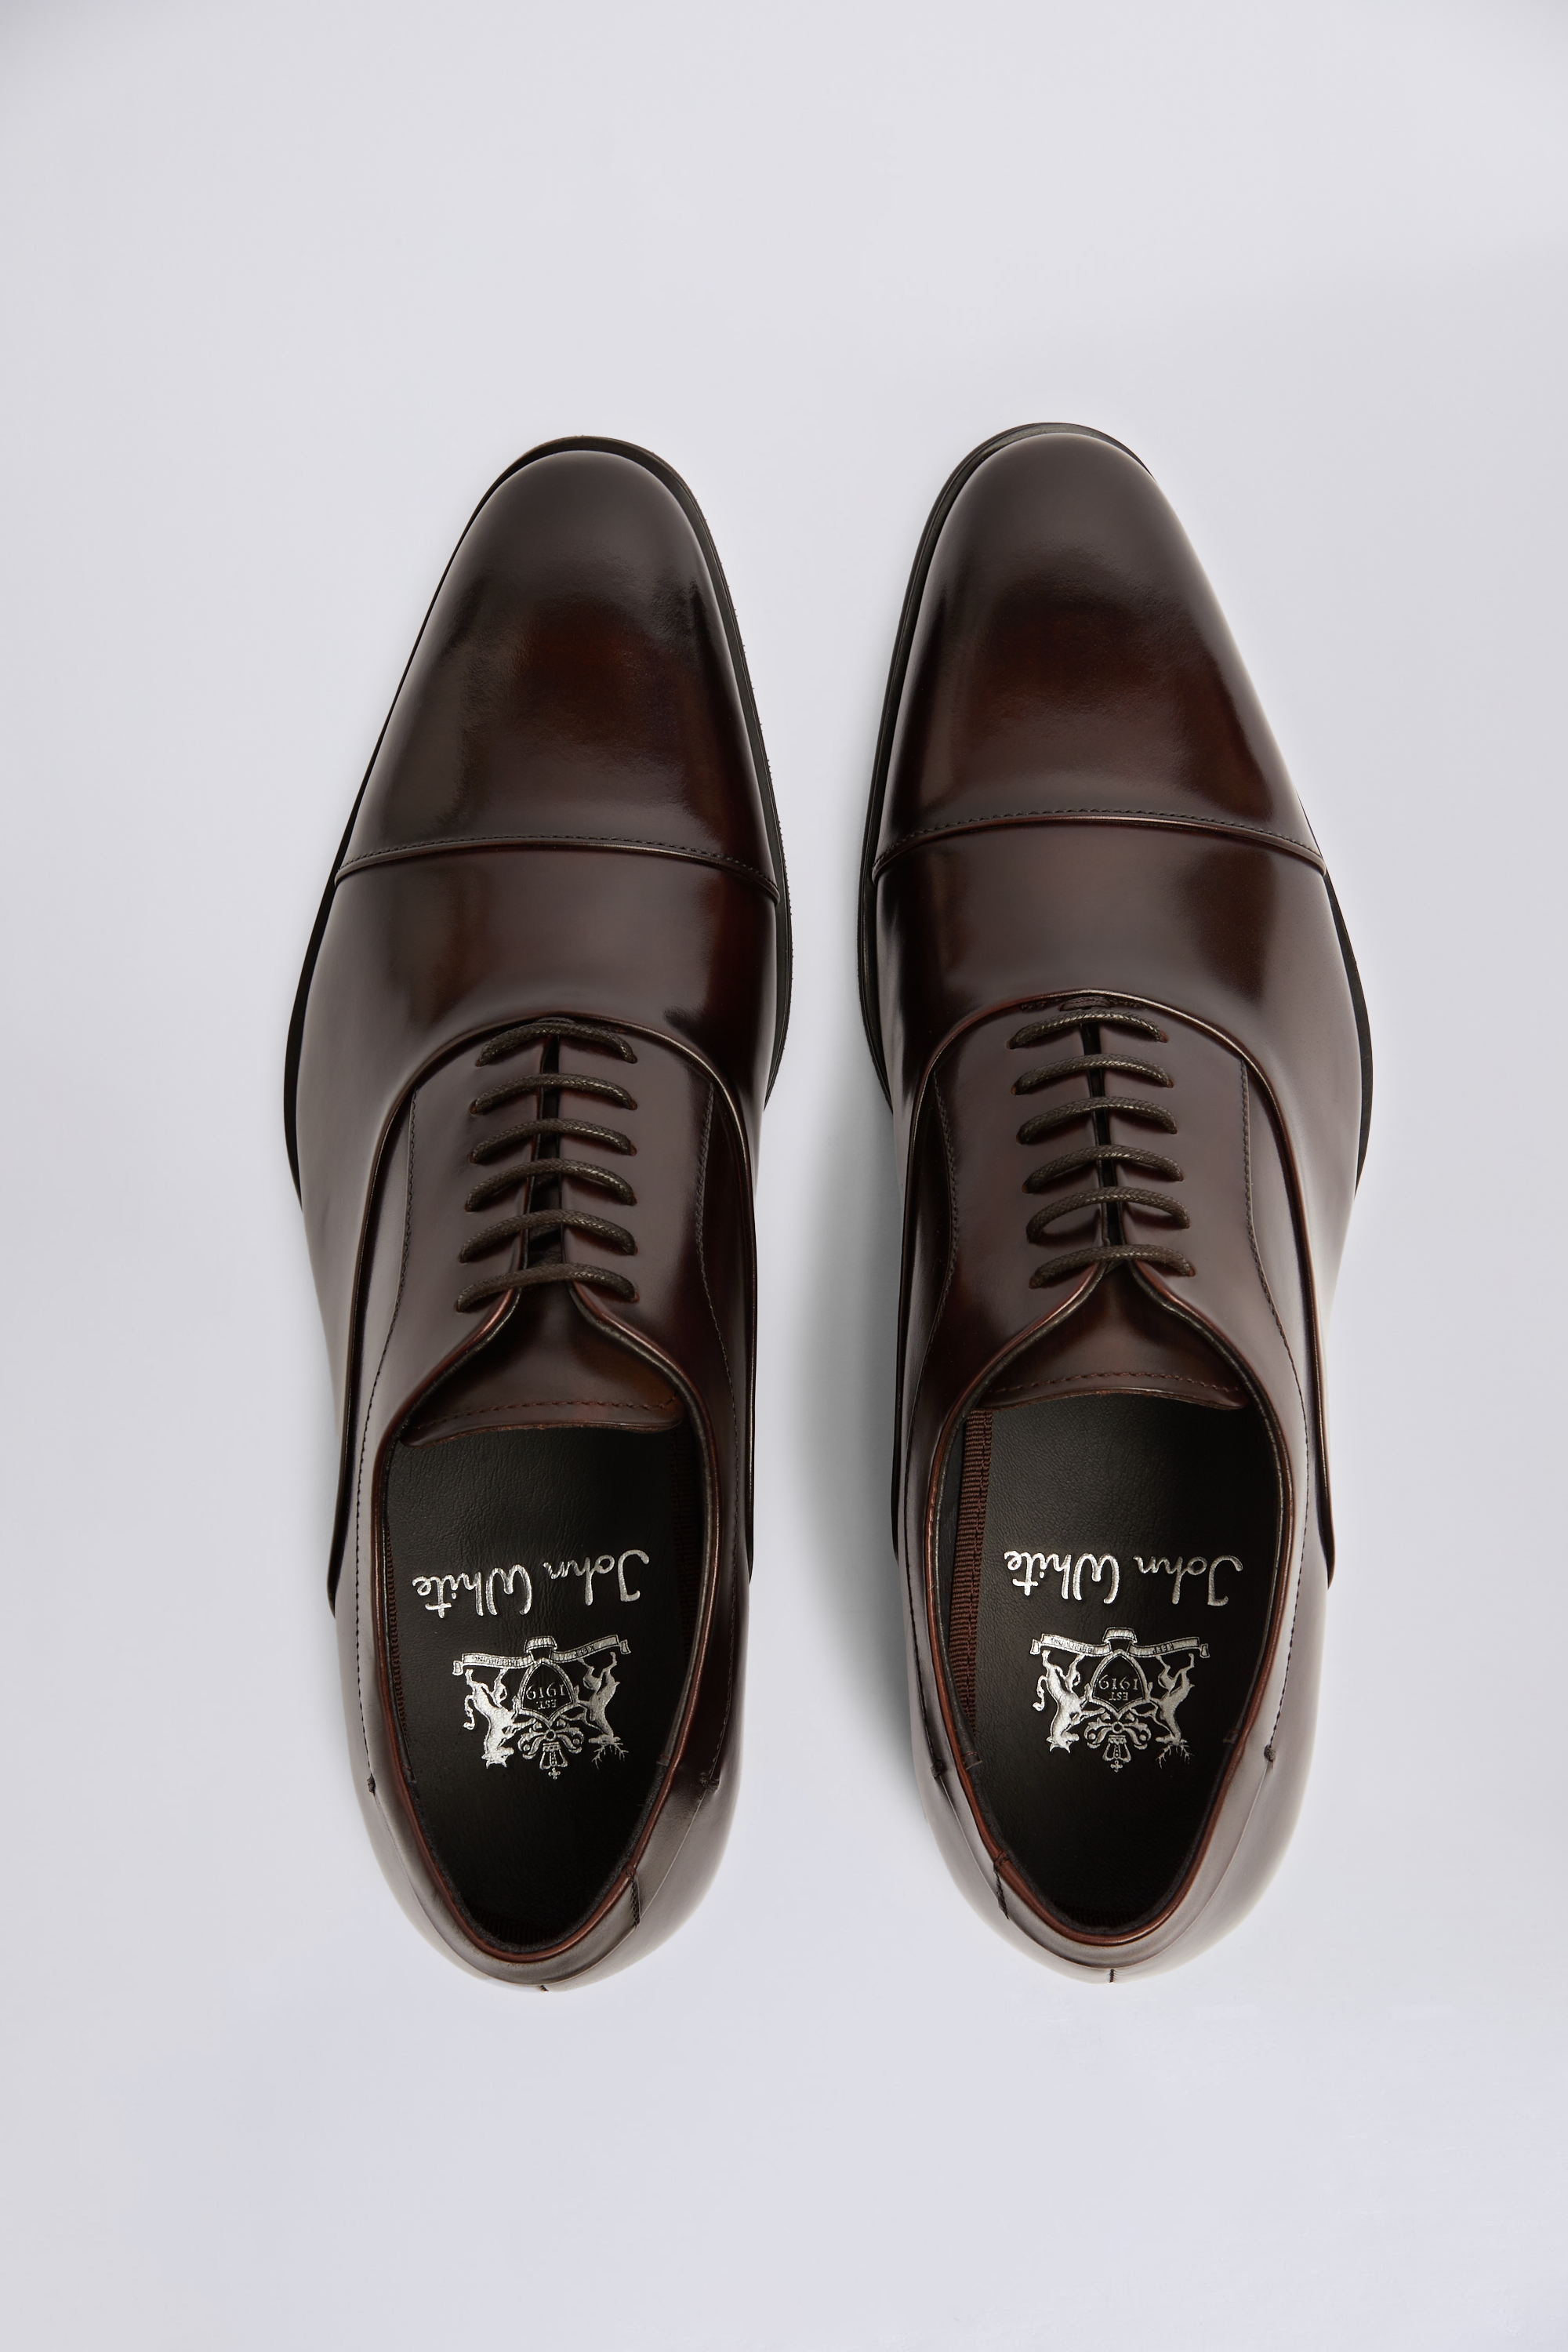 John White Guildhall Brown Oxford Shoes | Buy Online at Moss